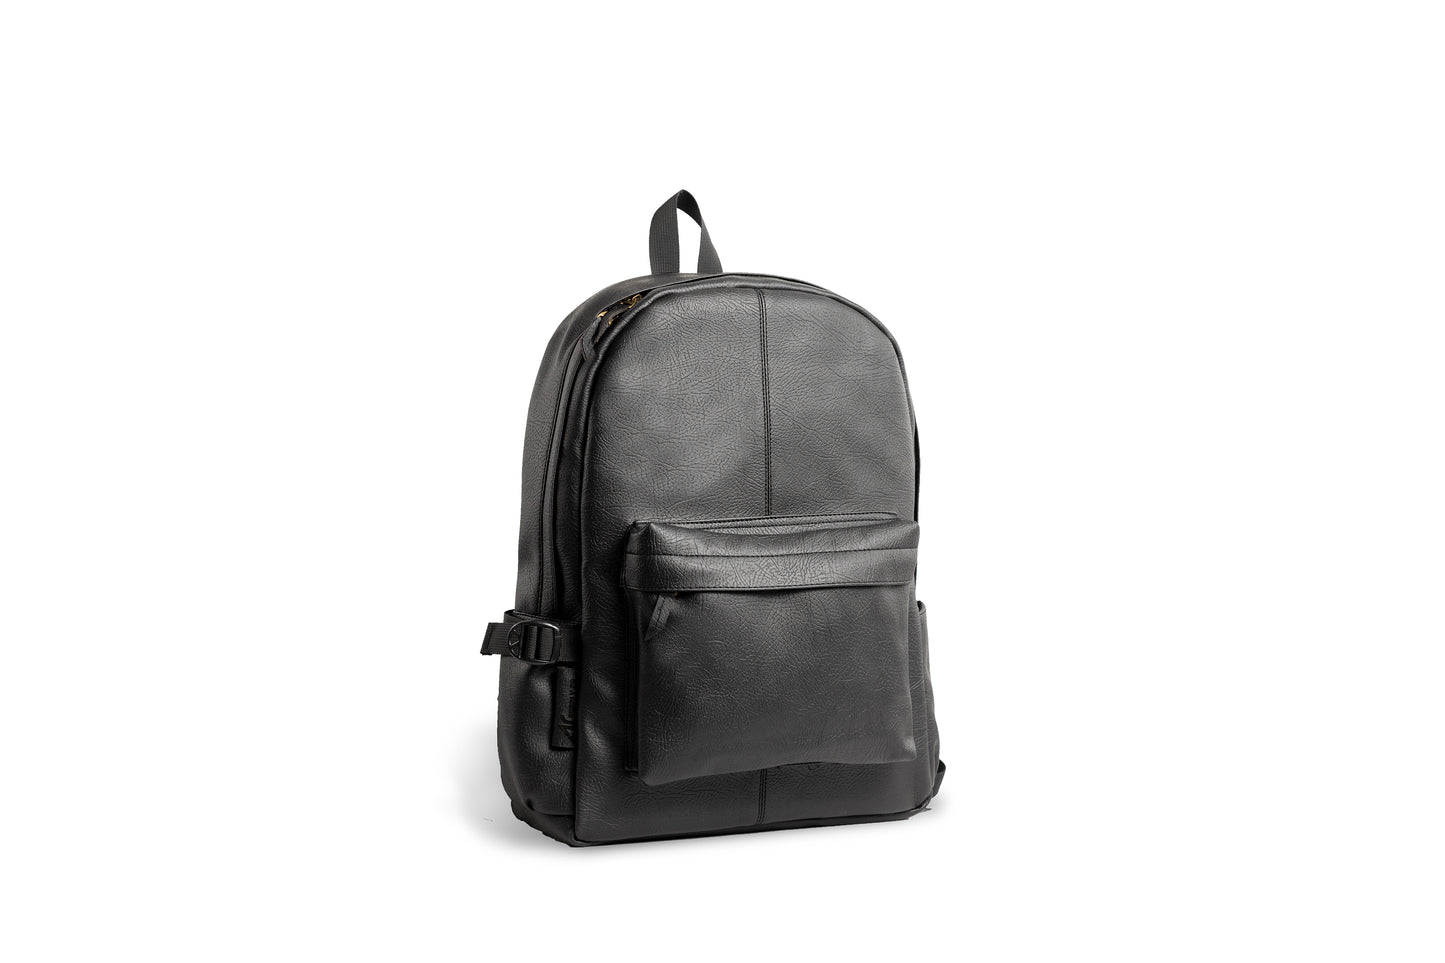 Ar leather backpack